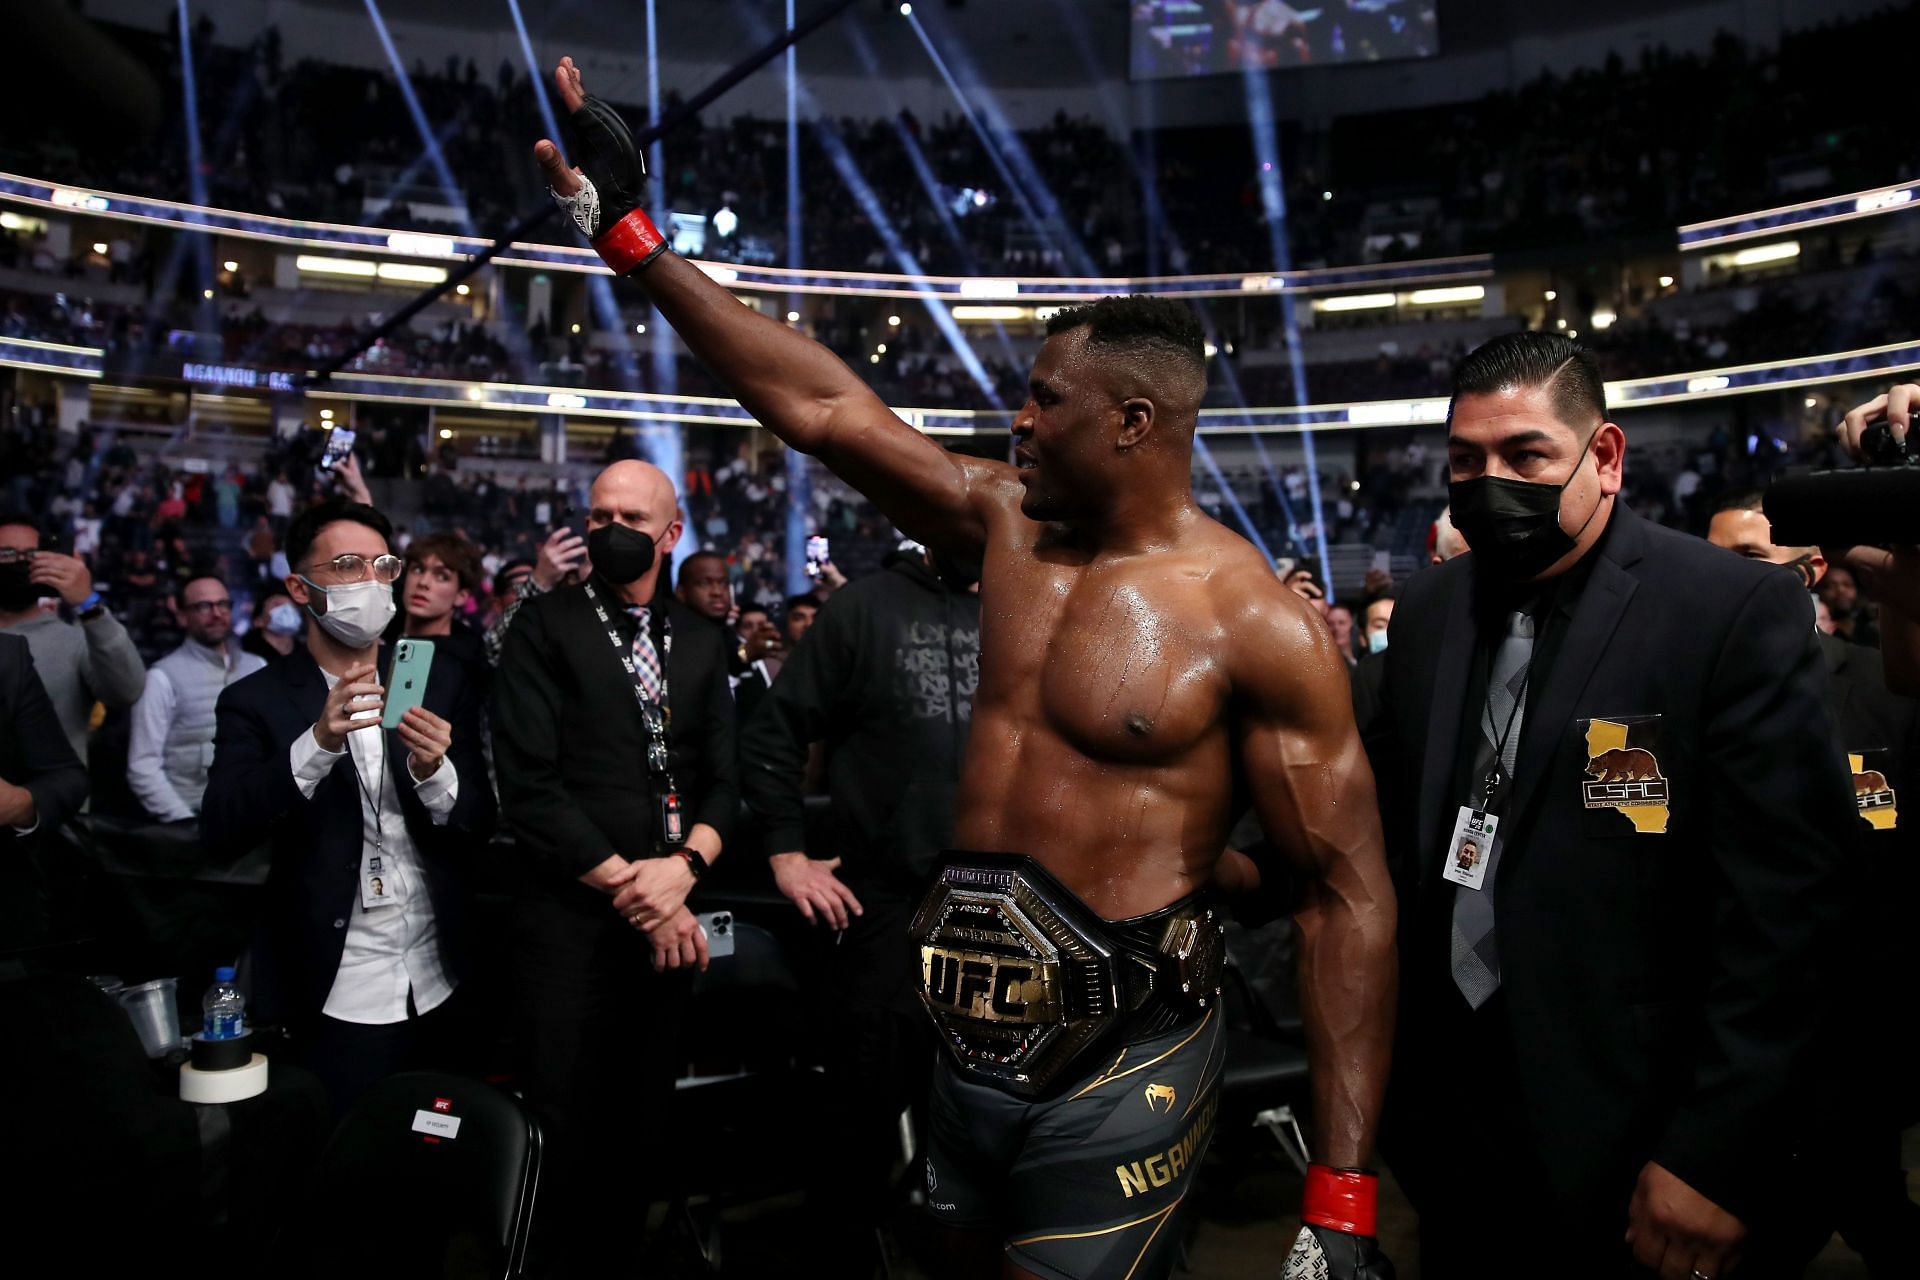 Will Francis Ngannou become the first champion to walk away from the UFC since 2004?